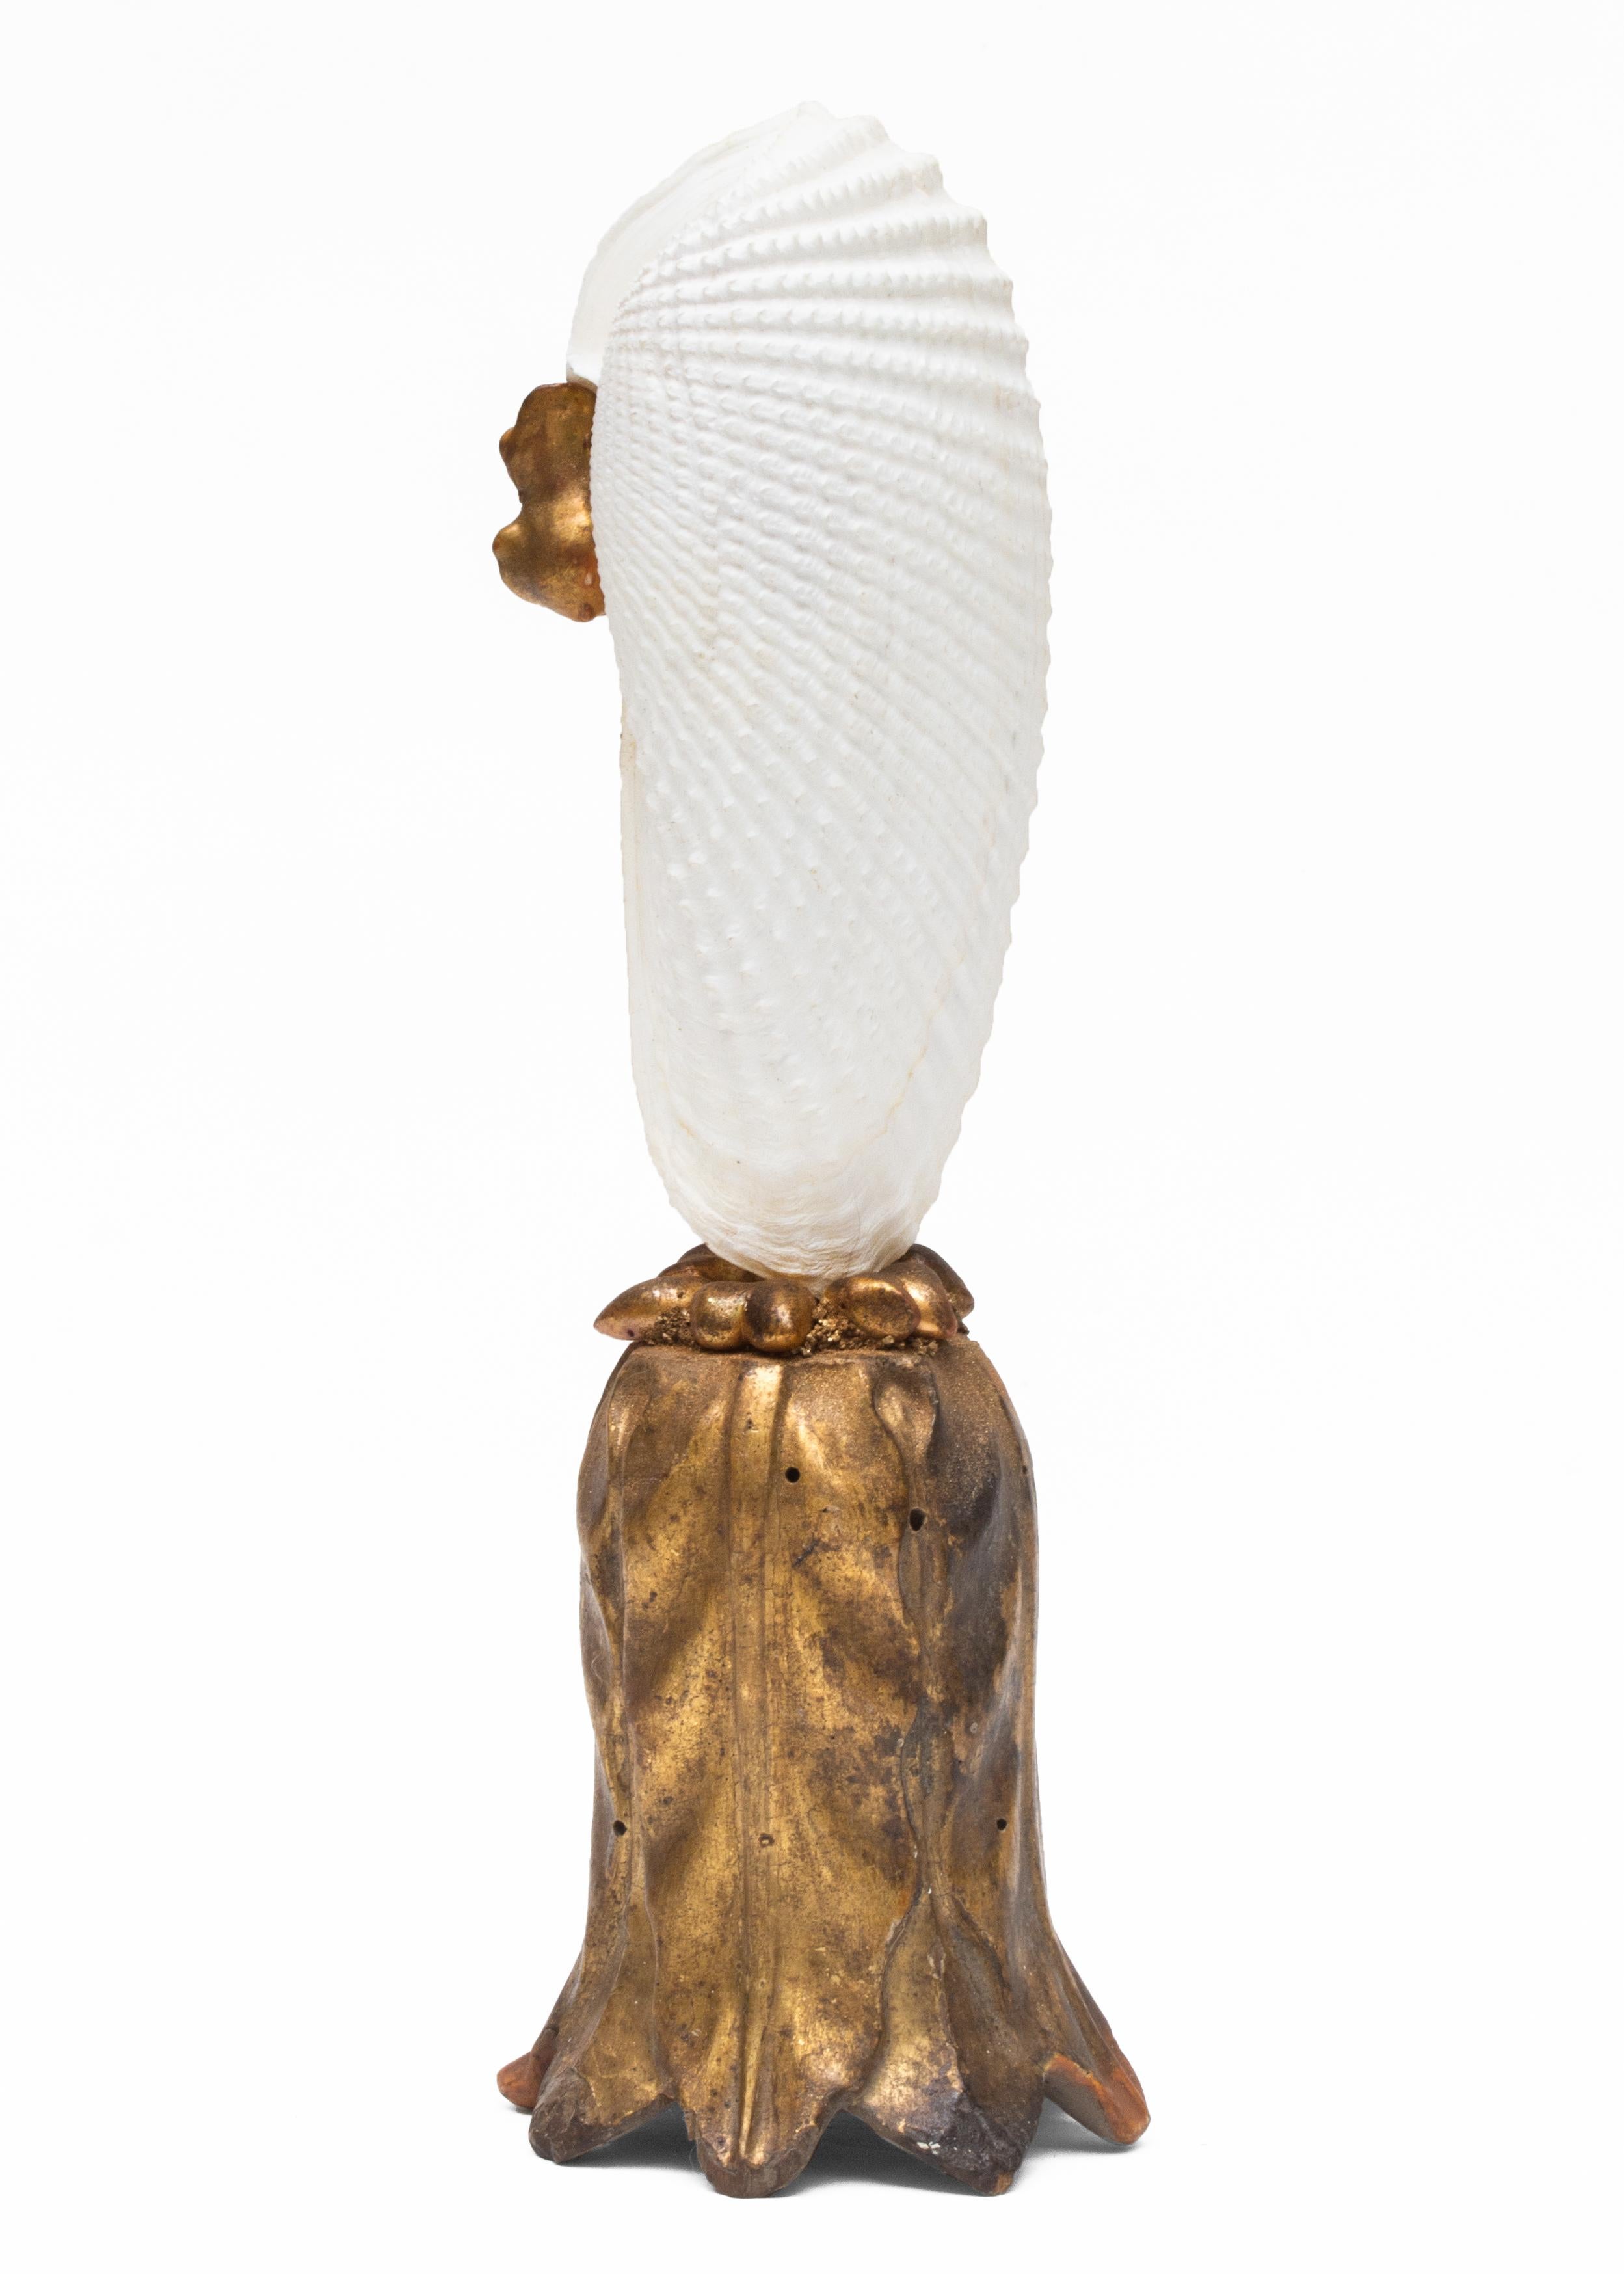 Wood Pair of Angel Wing Shells on 18th Century Gold Leaf Bases with Baroque Pearls